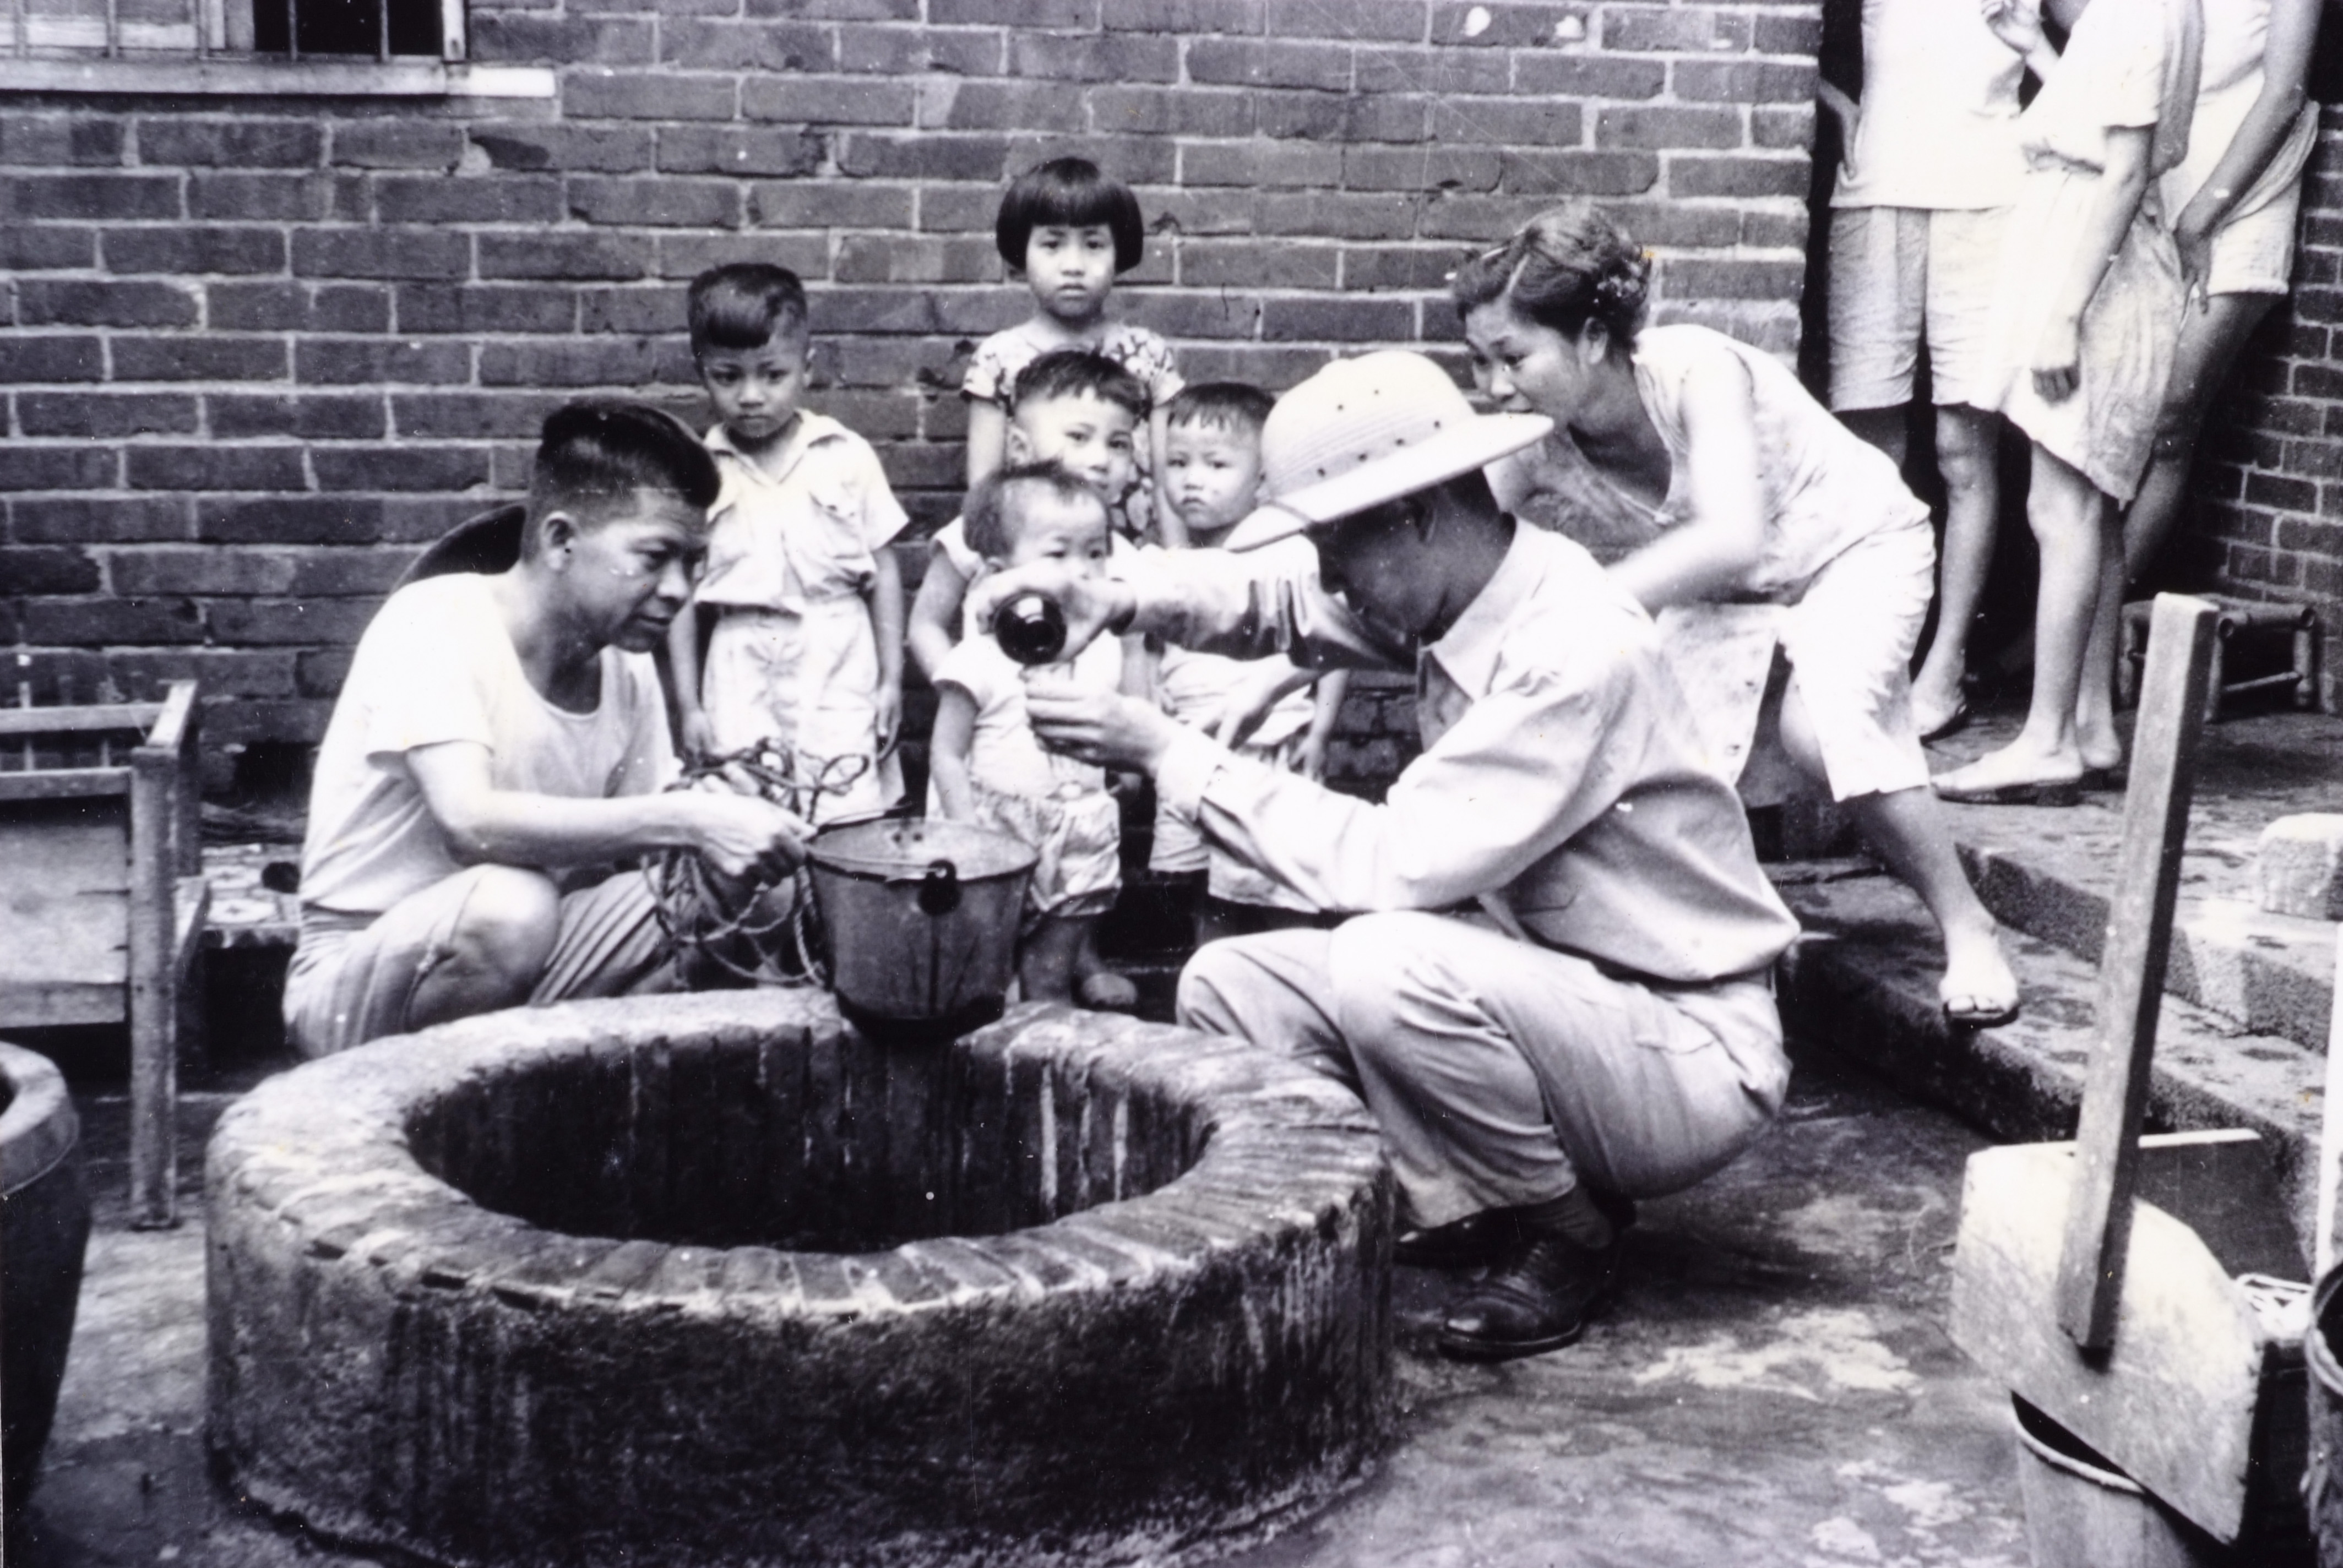 Well Water Quality Sampling, 1960